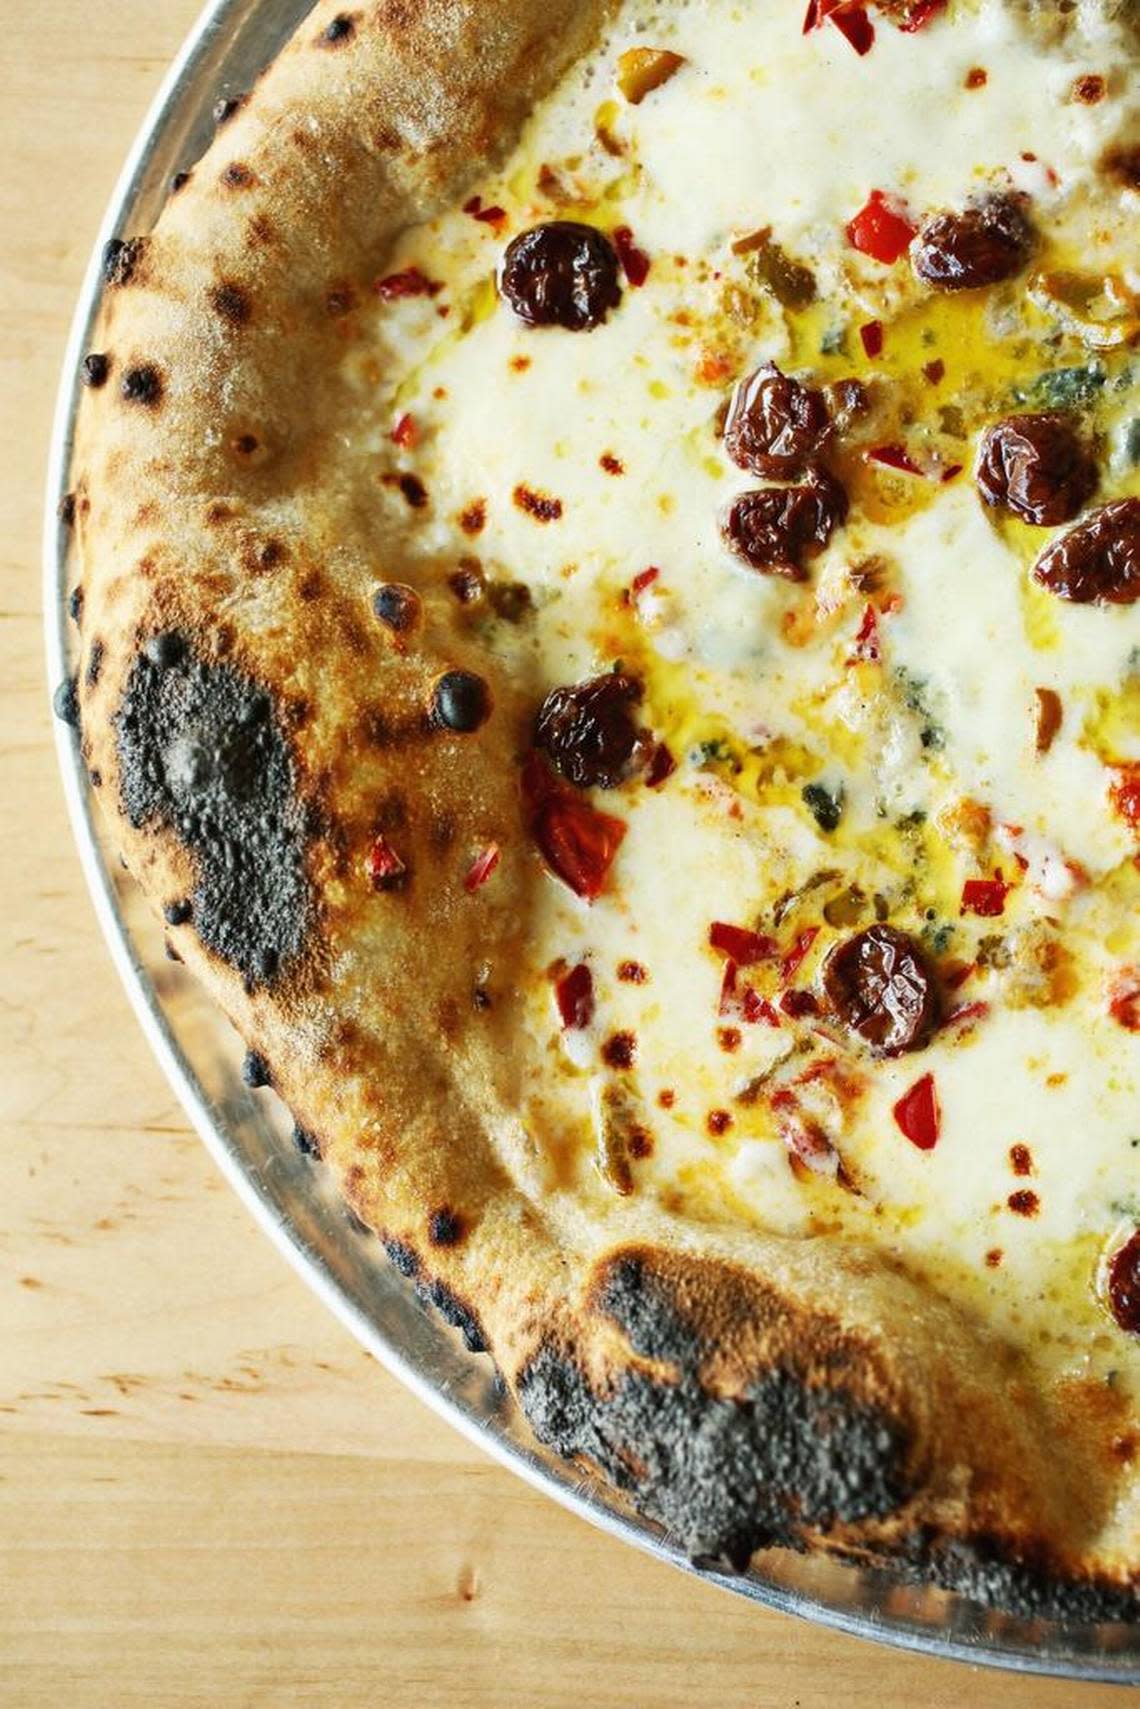 The Red White Blue pizza at Pizzeria Faulisi in Cary is made up of sour cherries, chilis, blue cheese and mozzarella. Toppings are first-rate and carefully applied with a generous hand (but not so generous as to overwhelm the crust).